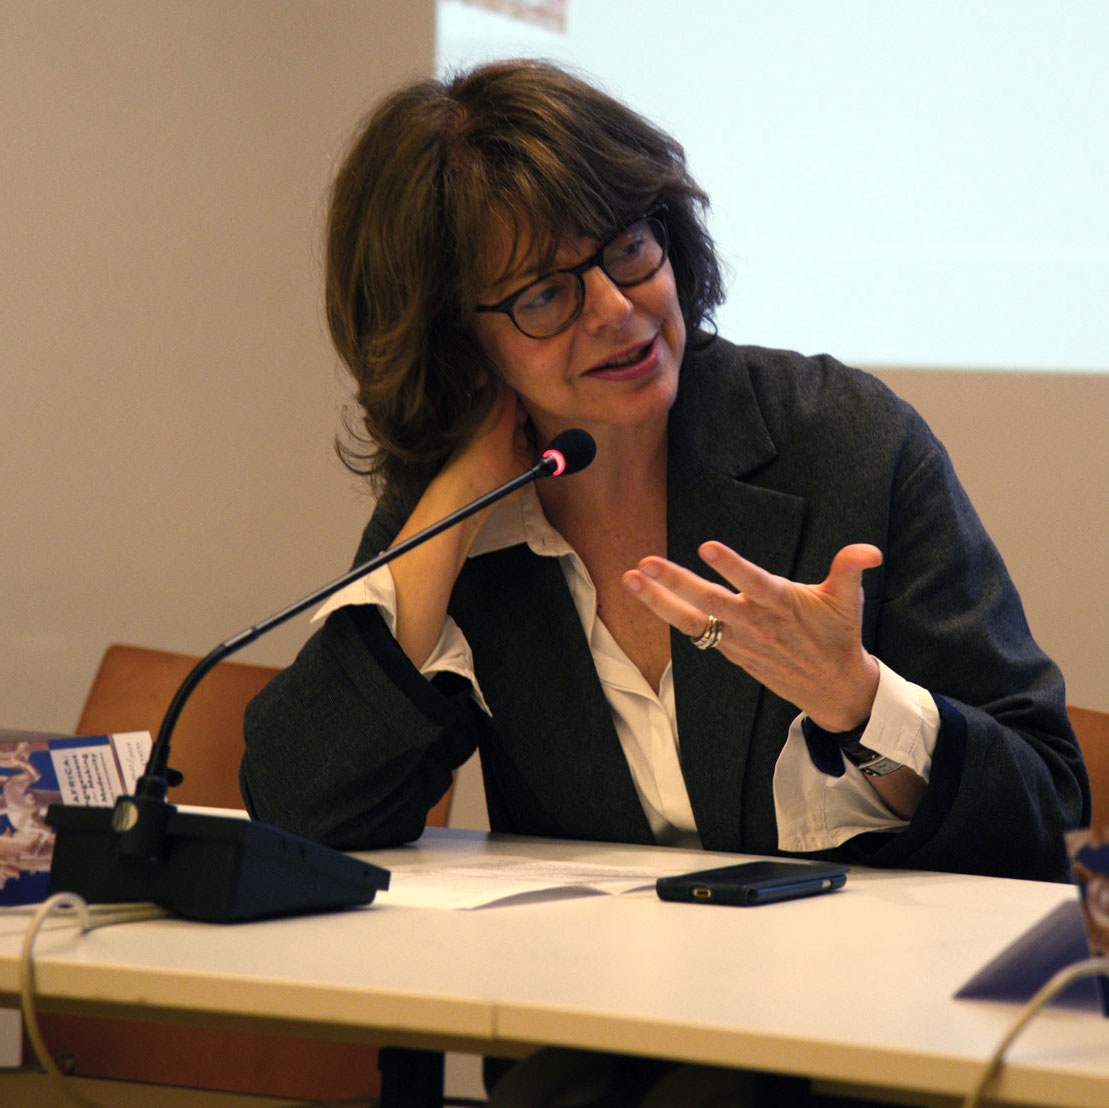 Alina Payne during a conference